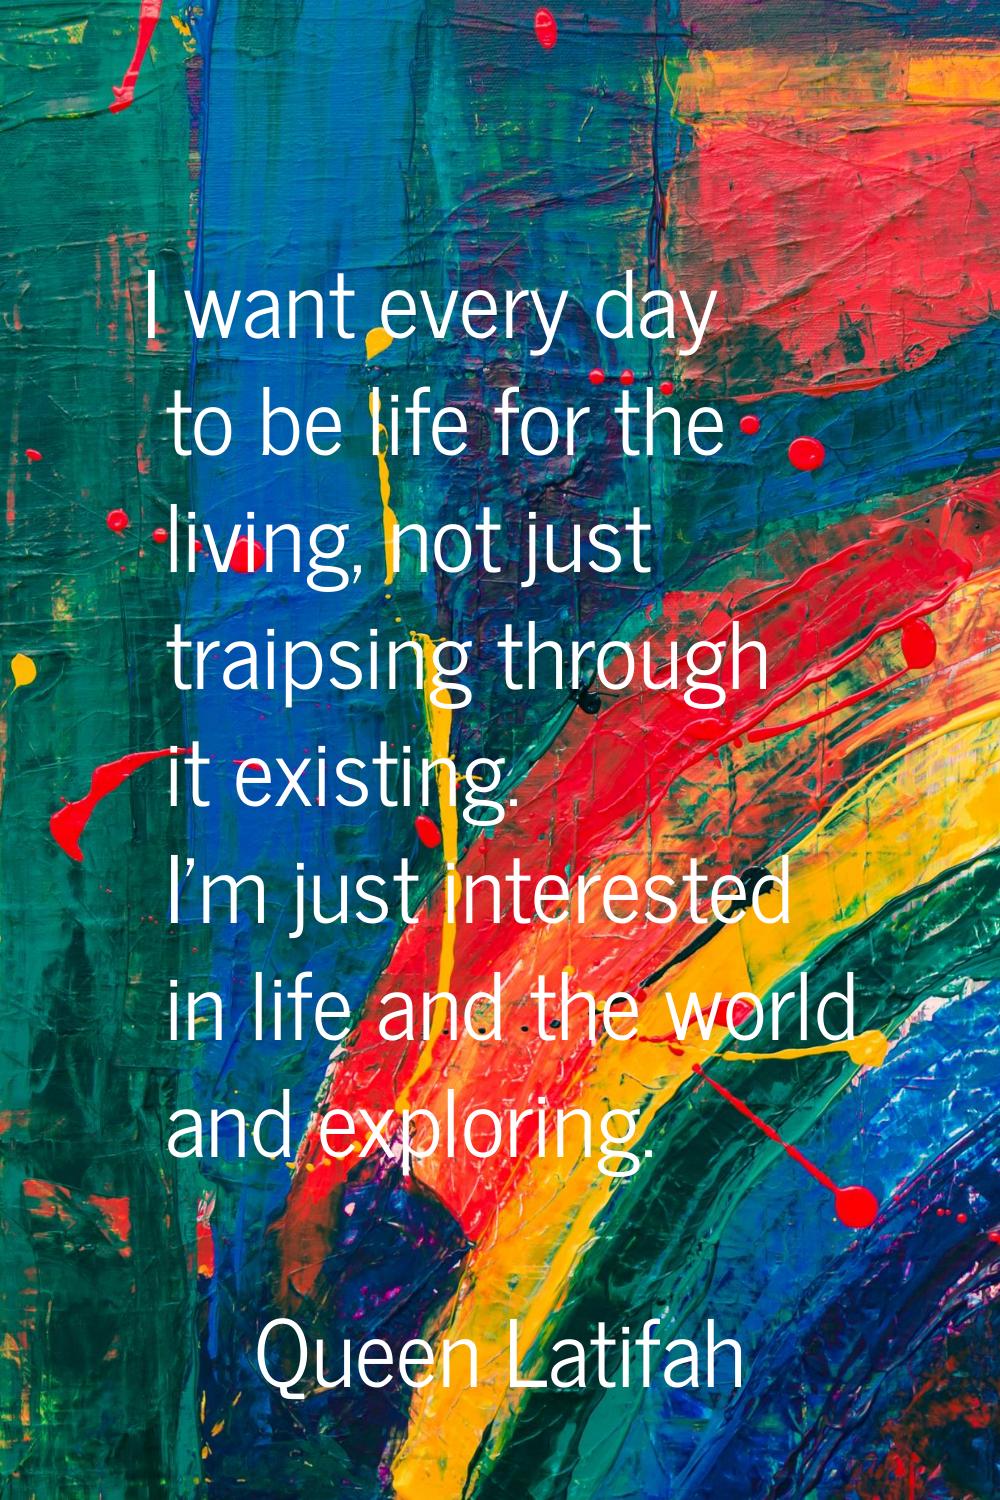 I want every day to be life for the living, not just traipsing through it existing. I'm just intere